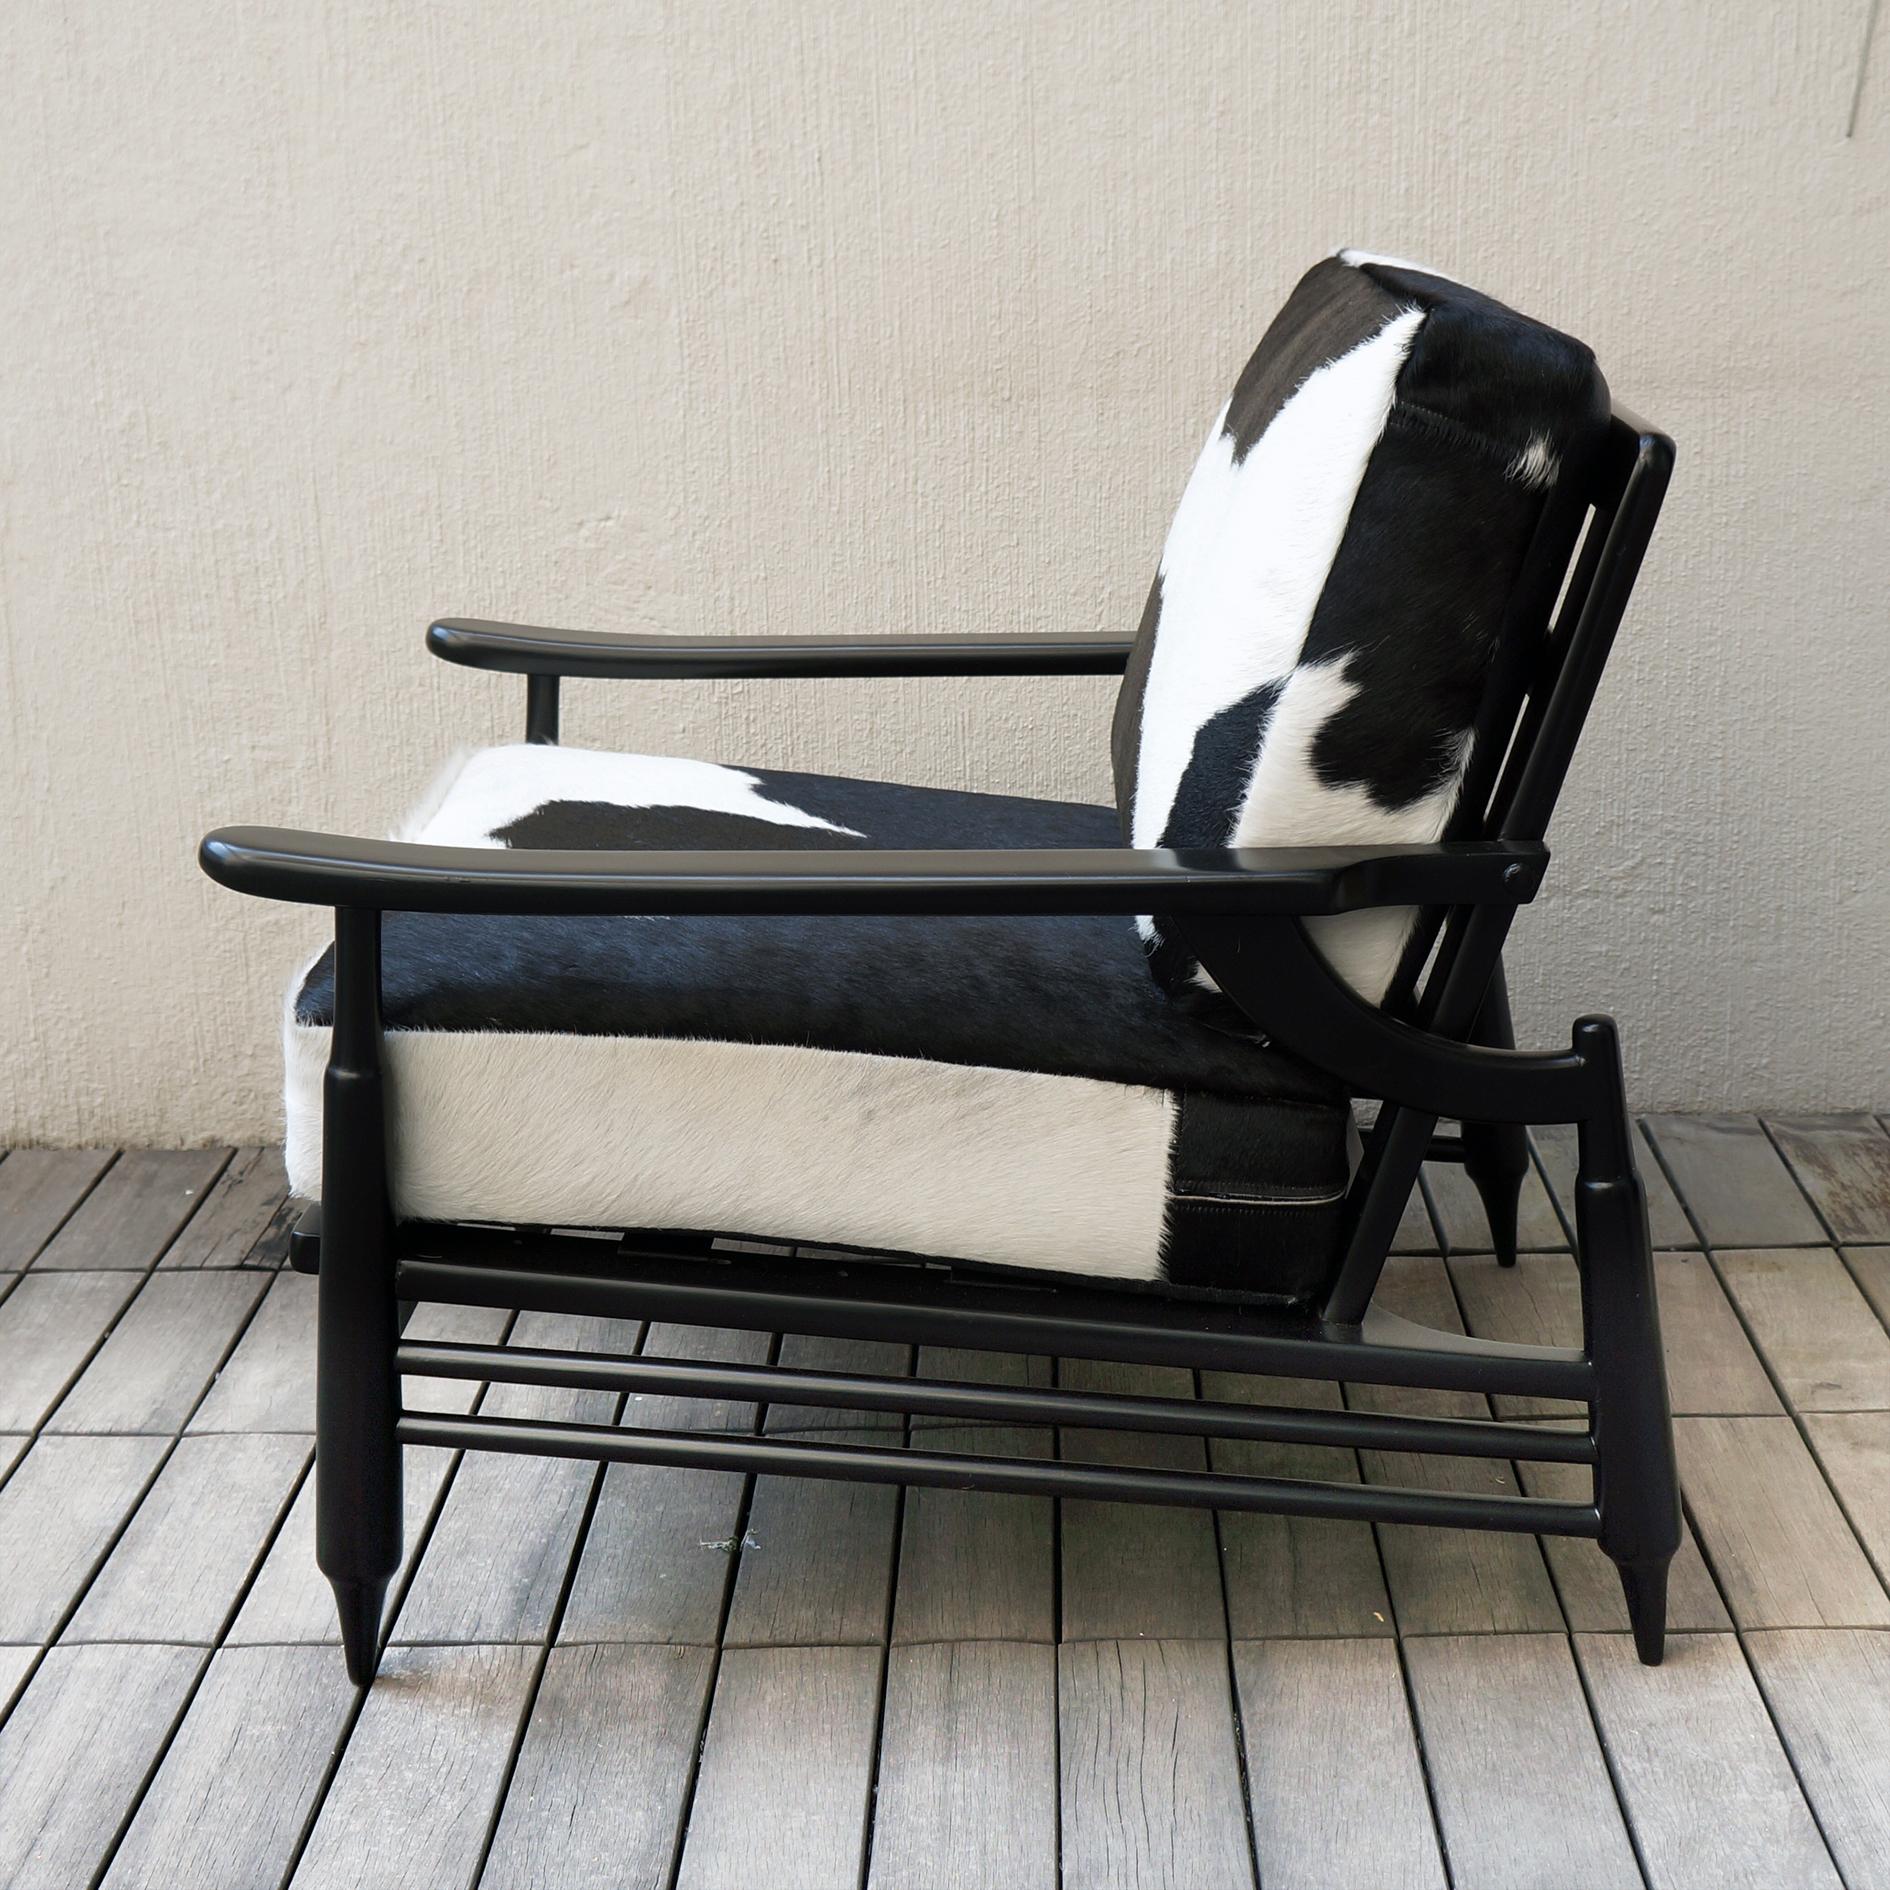 Unique piece. Lounge chair armchair created by Mexican artisans towards the mid-20th century. The piece has been restored in black lacquer paint and has natural leather (cow) seats.